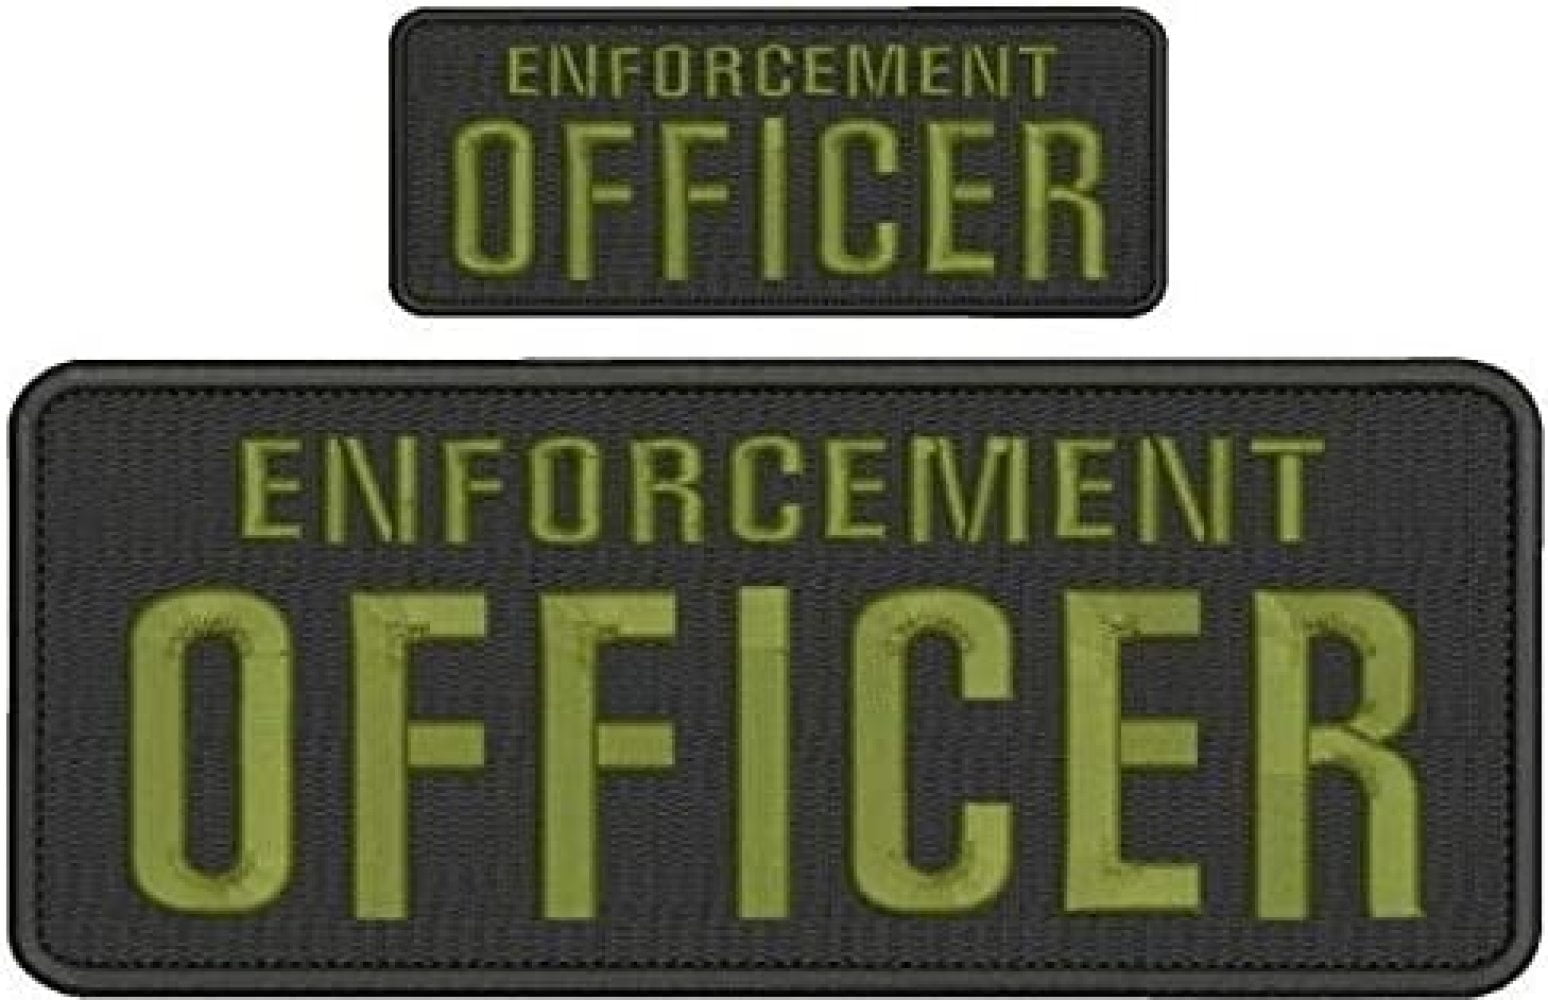 LAW ENFORCEMENT INSTRUCTOR EMBROIDERY PATCH 4X10 & 2X5  hook on back 